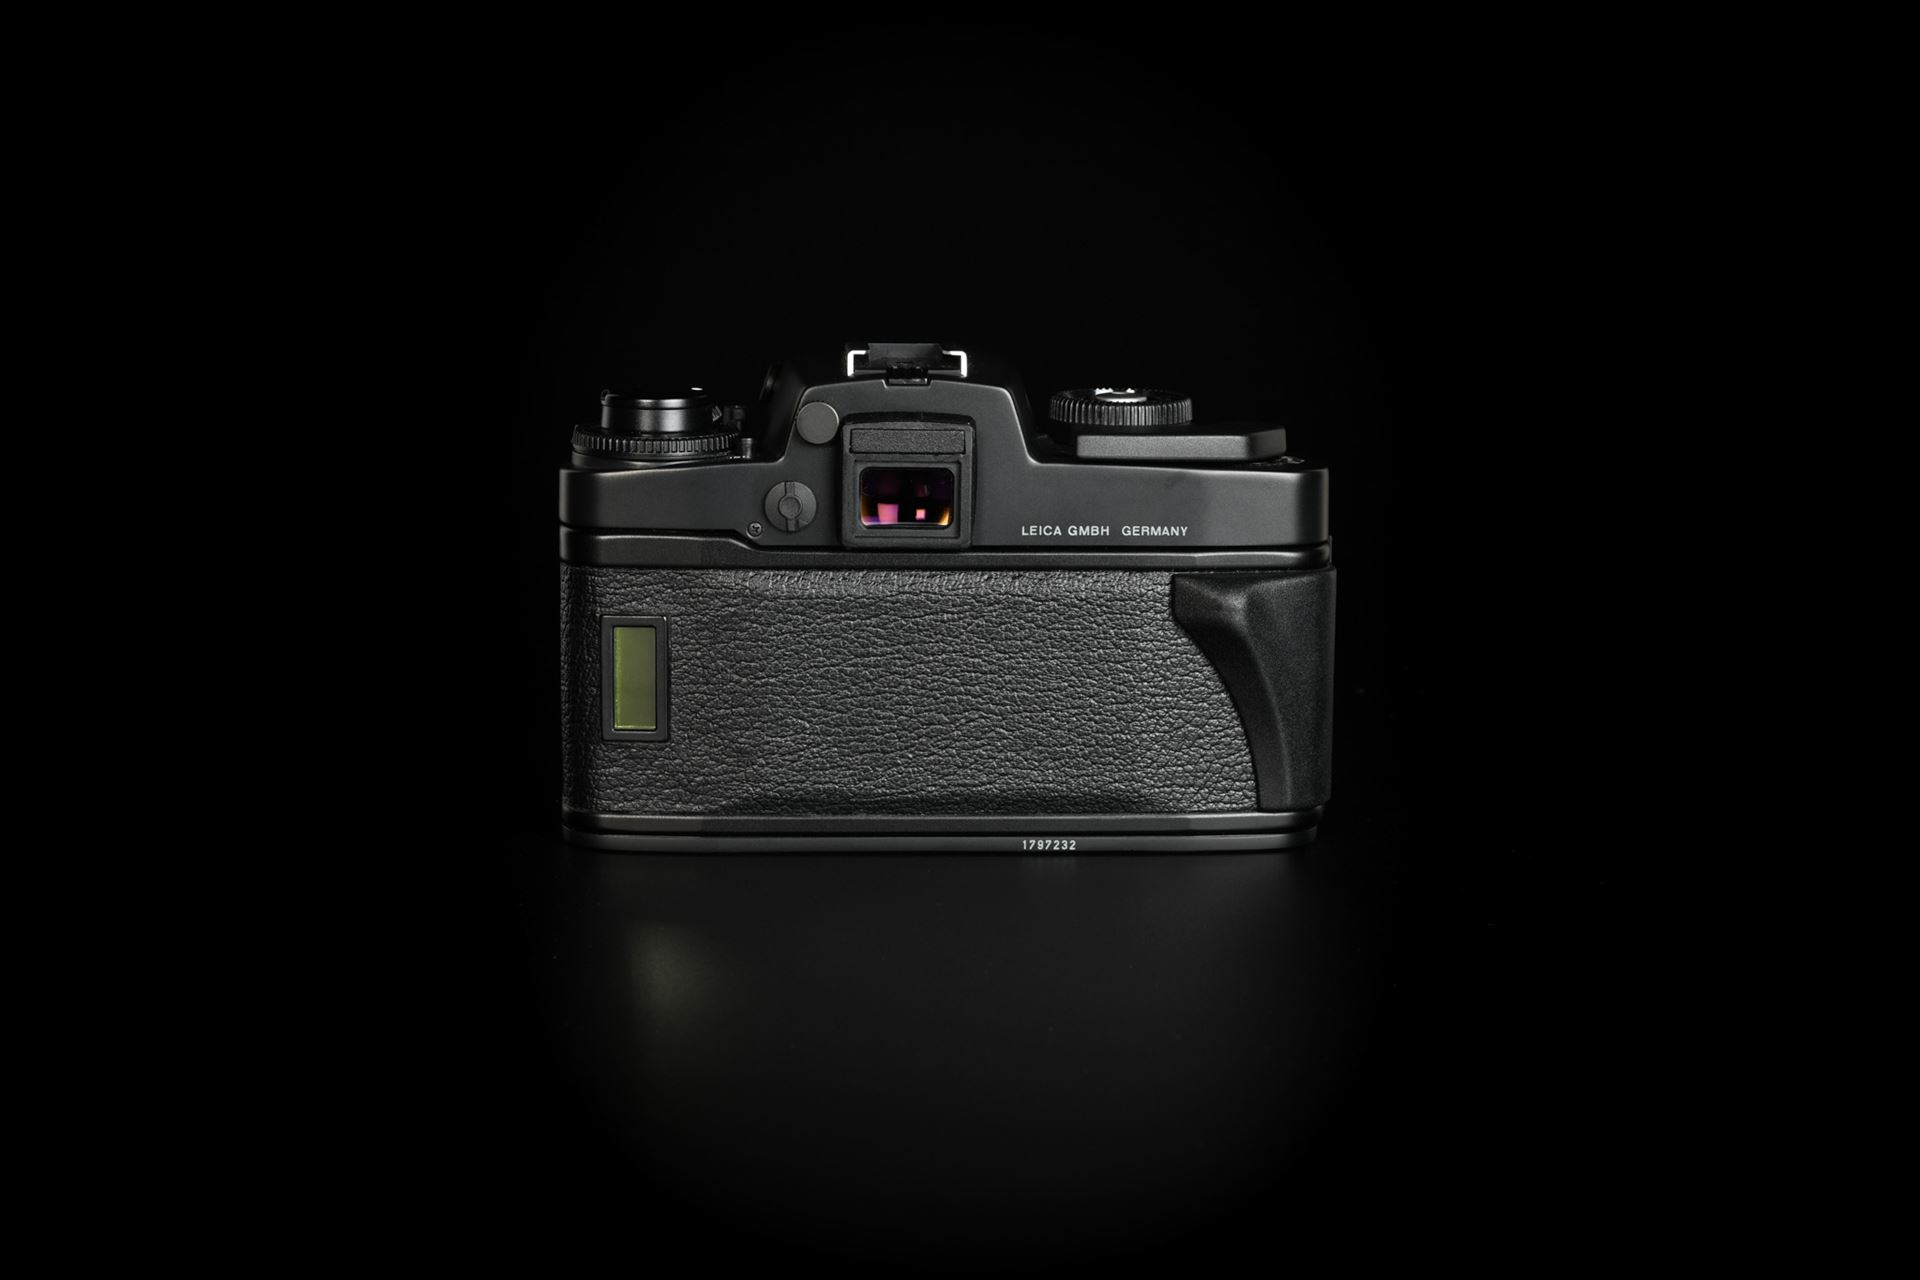 Picture of Leica R5 Black